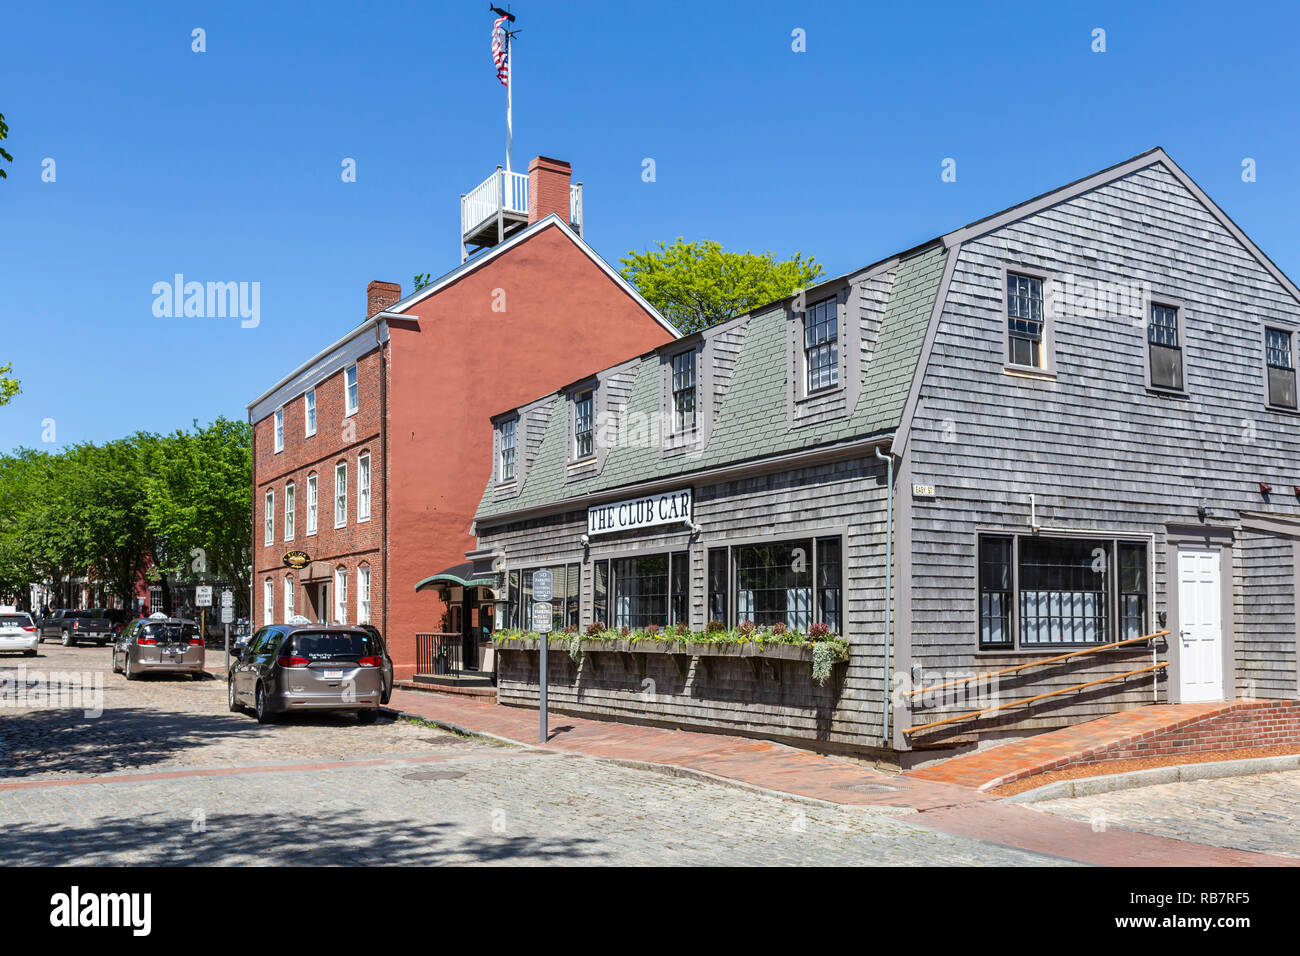 A view of Main Street including The Club Car restaurant in Nantucket, Massachusetts. Stock Photo